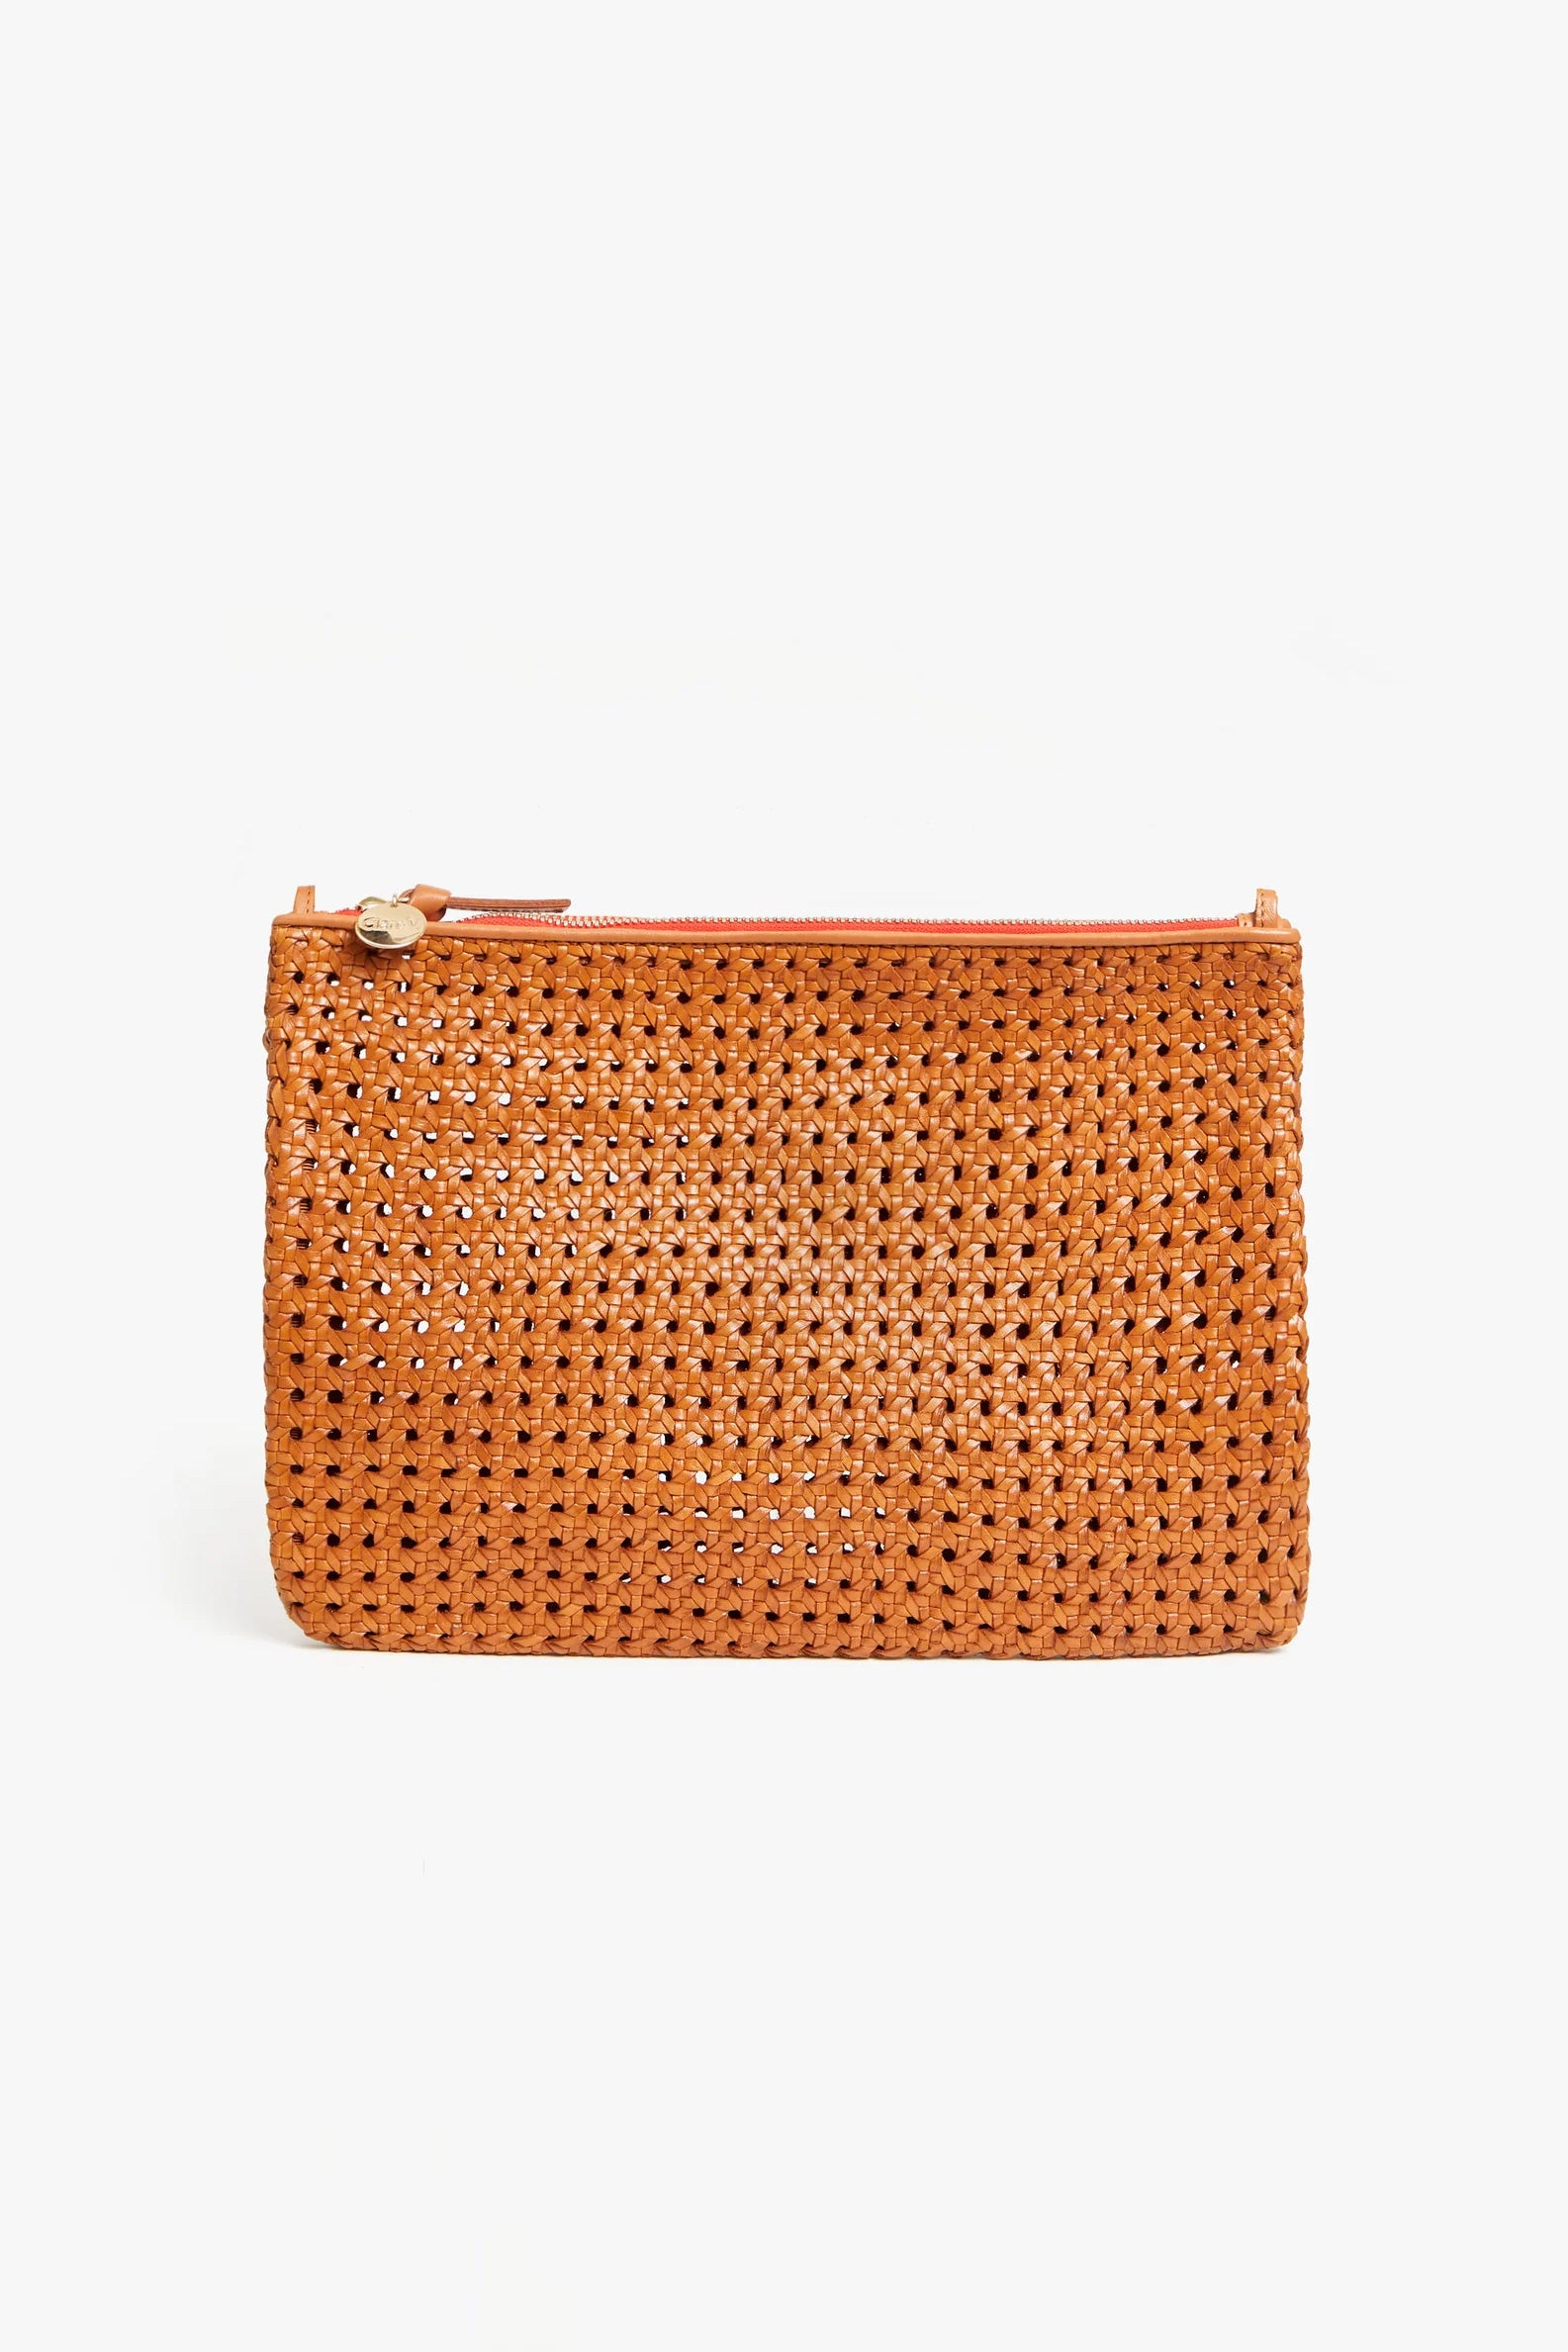 Clare-V-Flat-Clutch-With-Tabs-Tan-Rattan